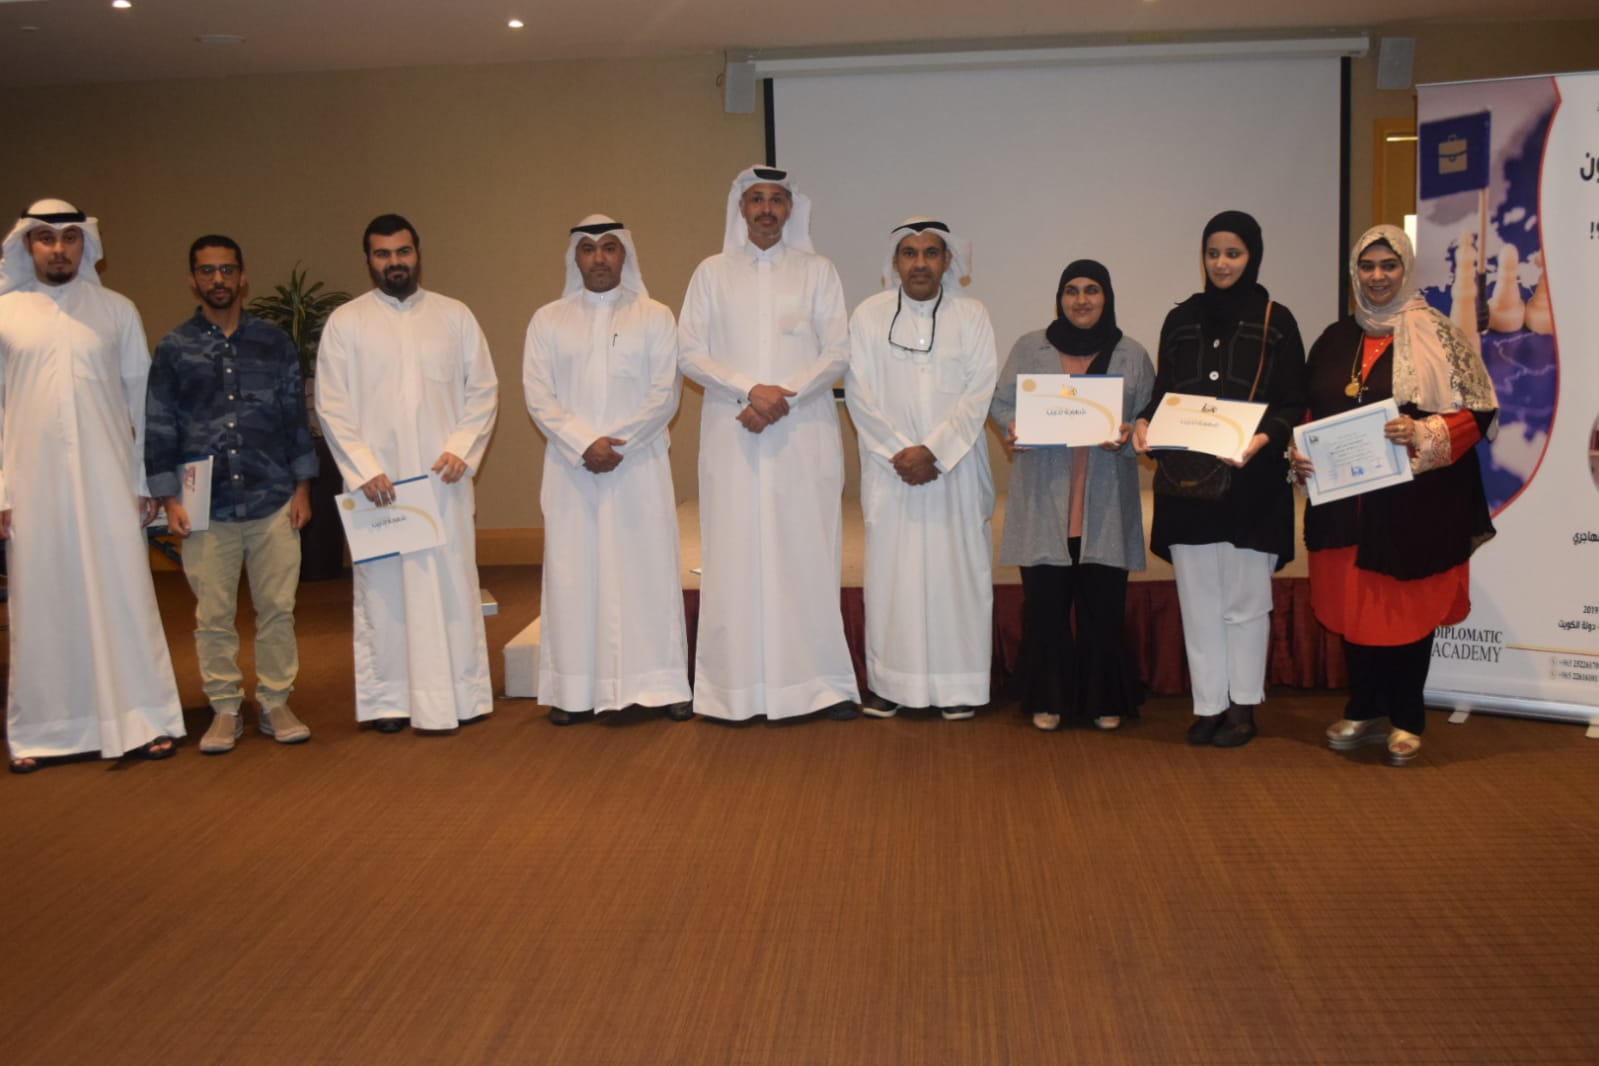 How to be a diplomatic in your life program (Kuwait) done at 01/04/2019